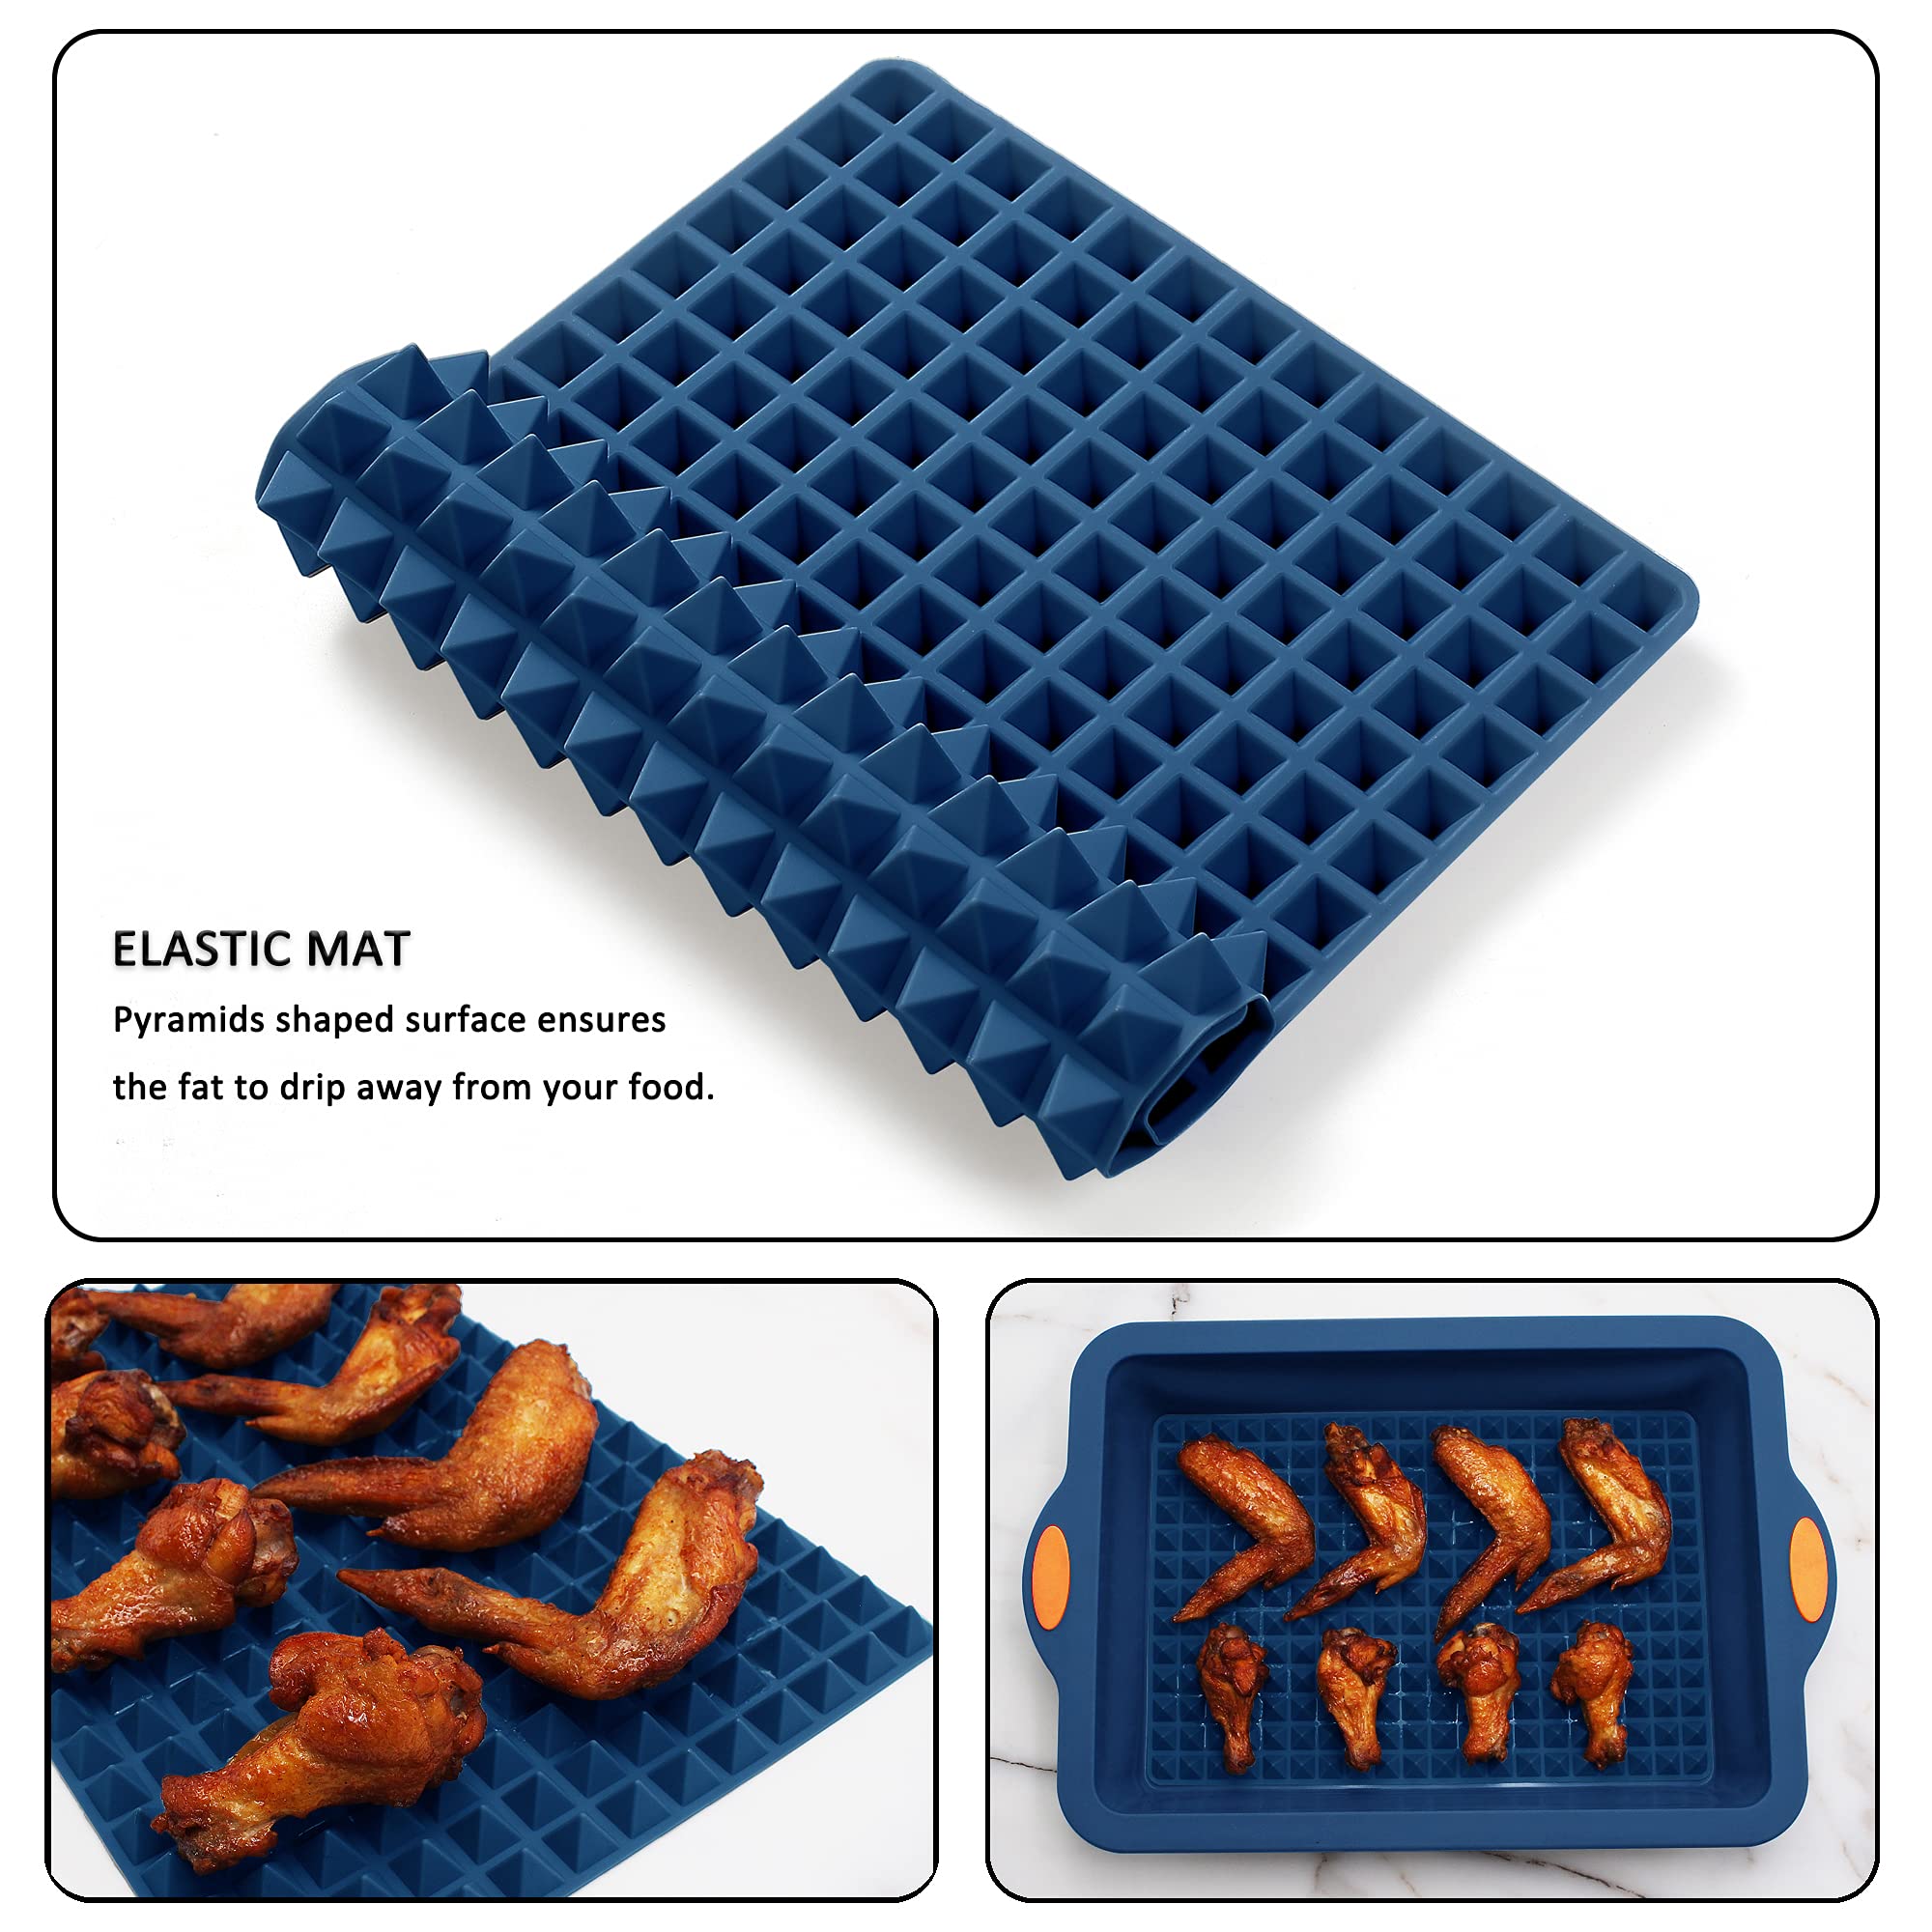 To encounter 8 in 1 Silicone Baking Set - 6 Silicone Molds - 2 Silicone Baking Mat, Nonstick Cookie Sheet, Cake Muffin Bread Pan with Metal Reinforced Frame More Strength, Navy Blue